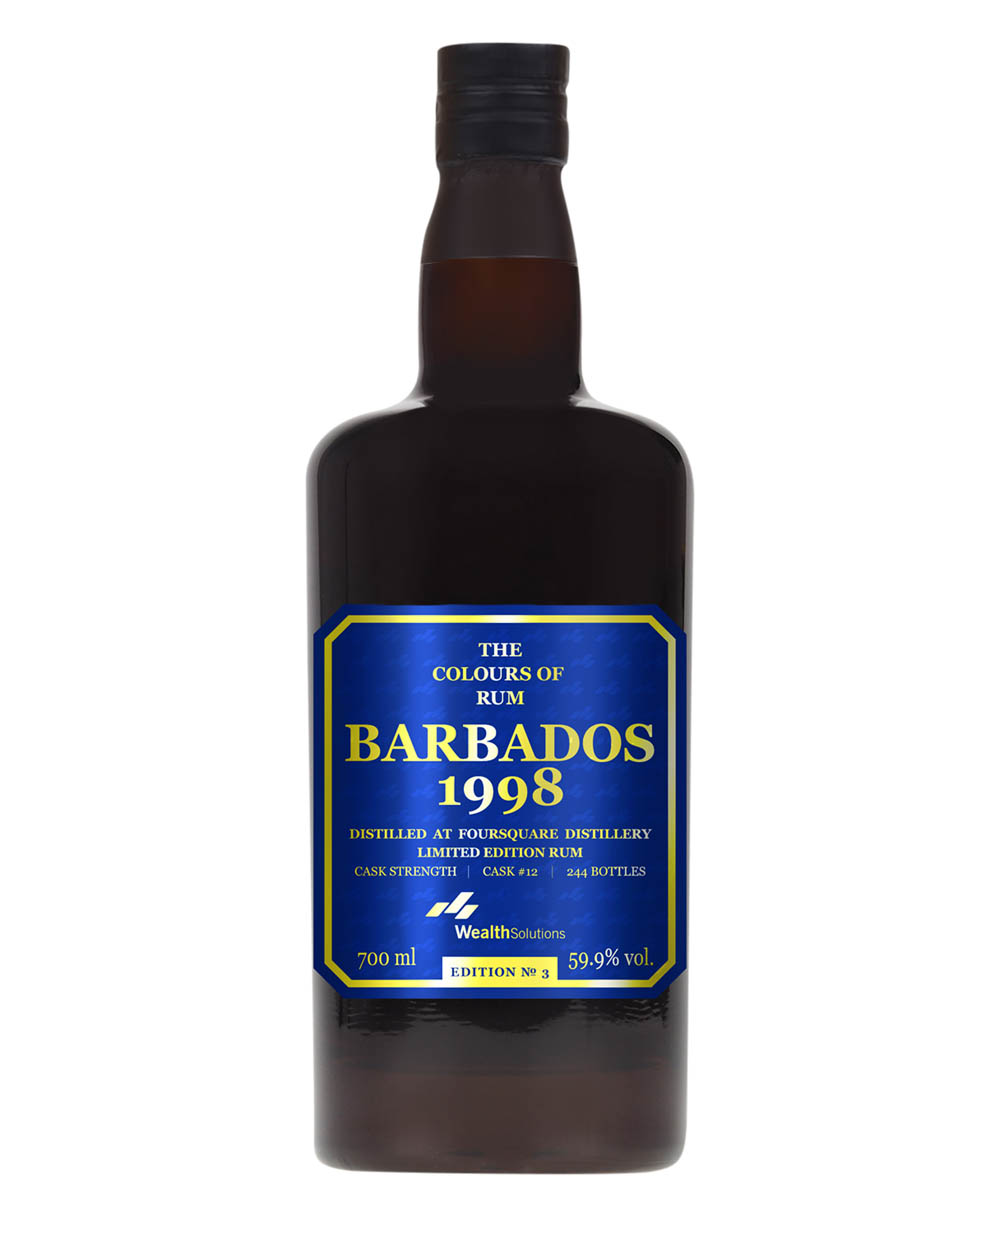 Foursquare Barbados 1998 The Colours Of Rum Edition 3 Musthave Malts MHM